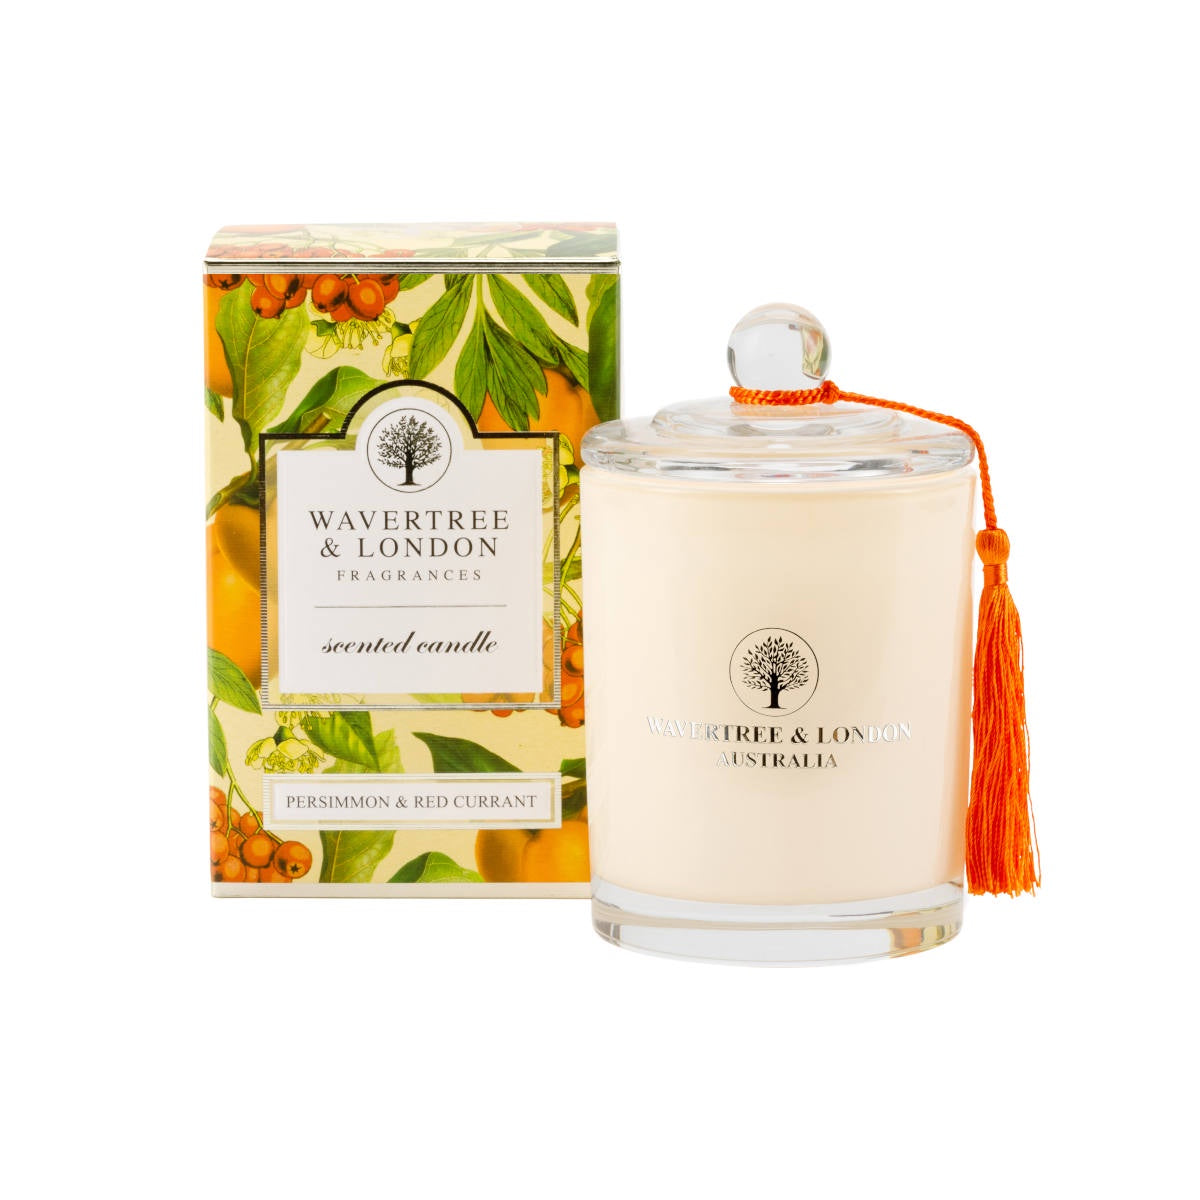 Wavertree & London Candle - Persimmon Red Currant